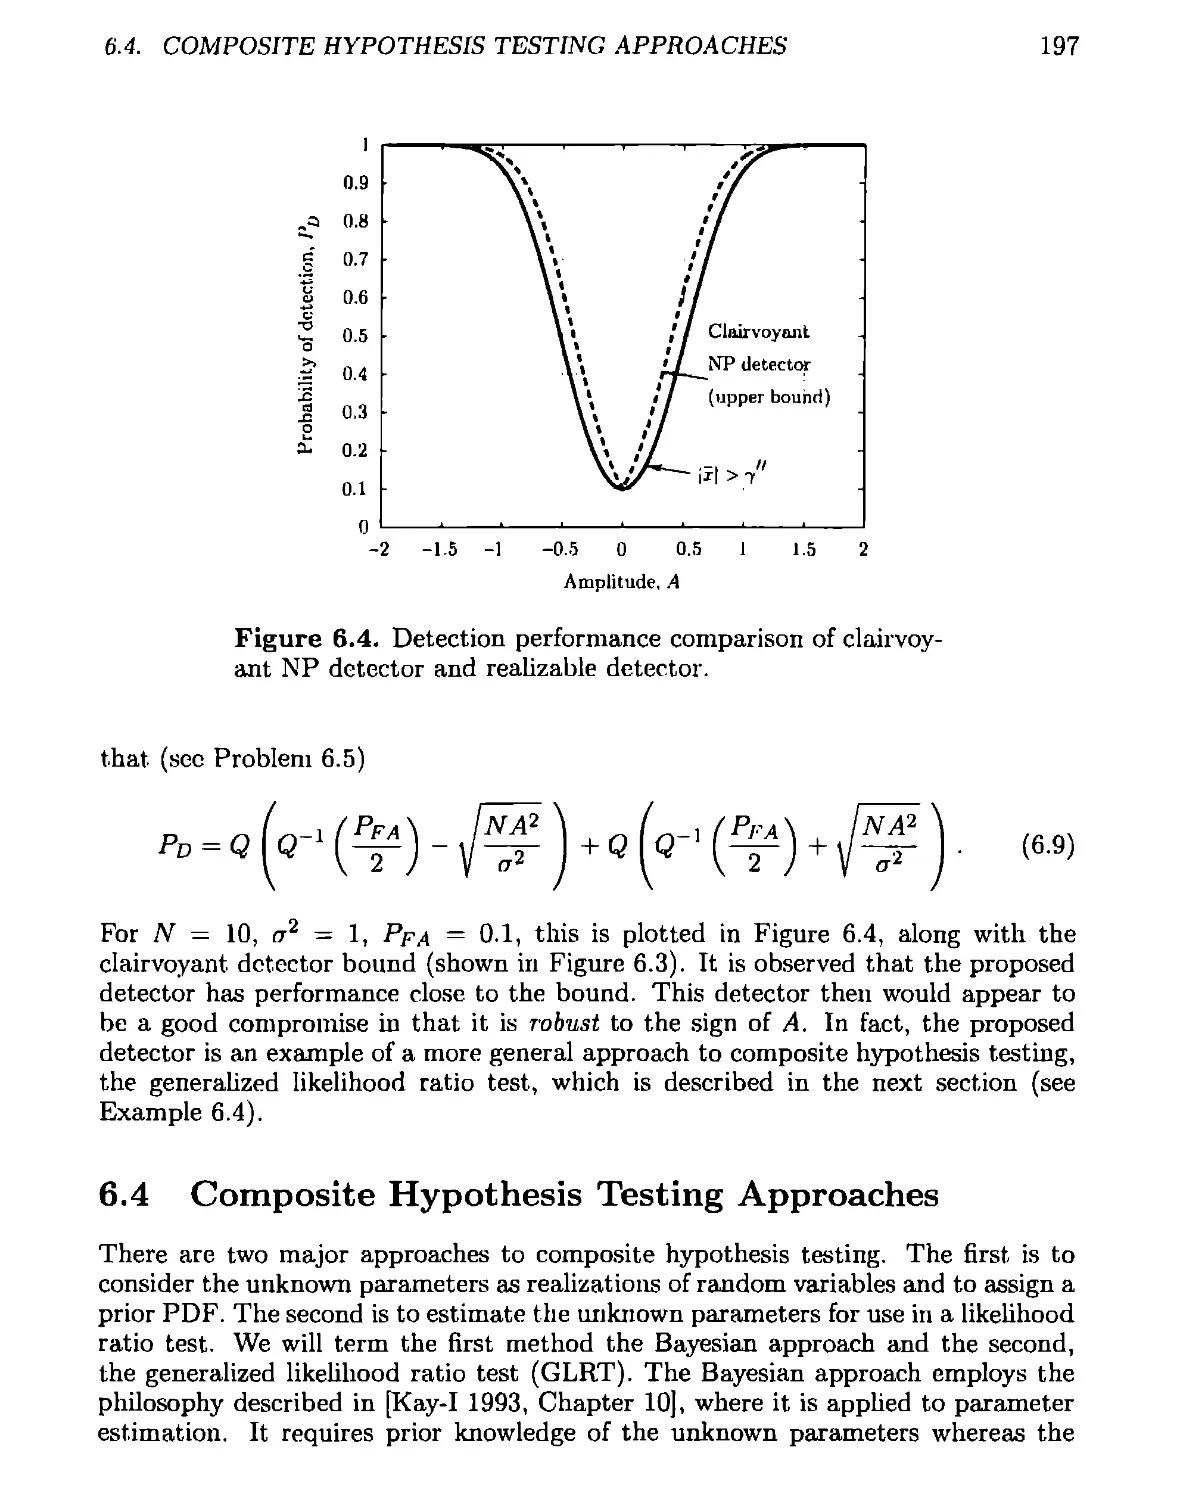 6.4 Composite Hypothesis Testing Approaches